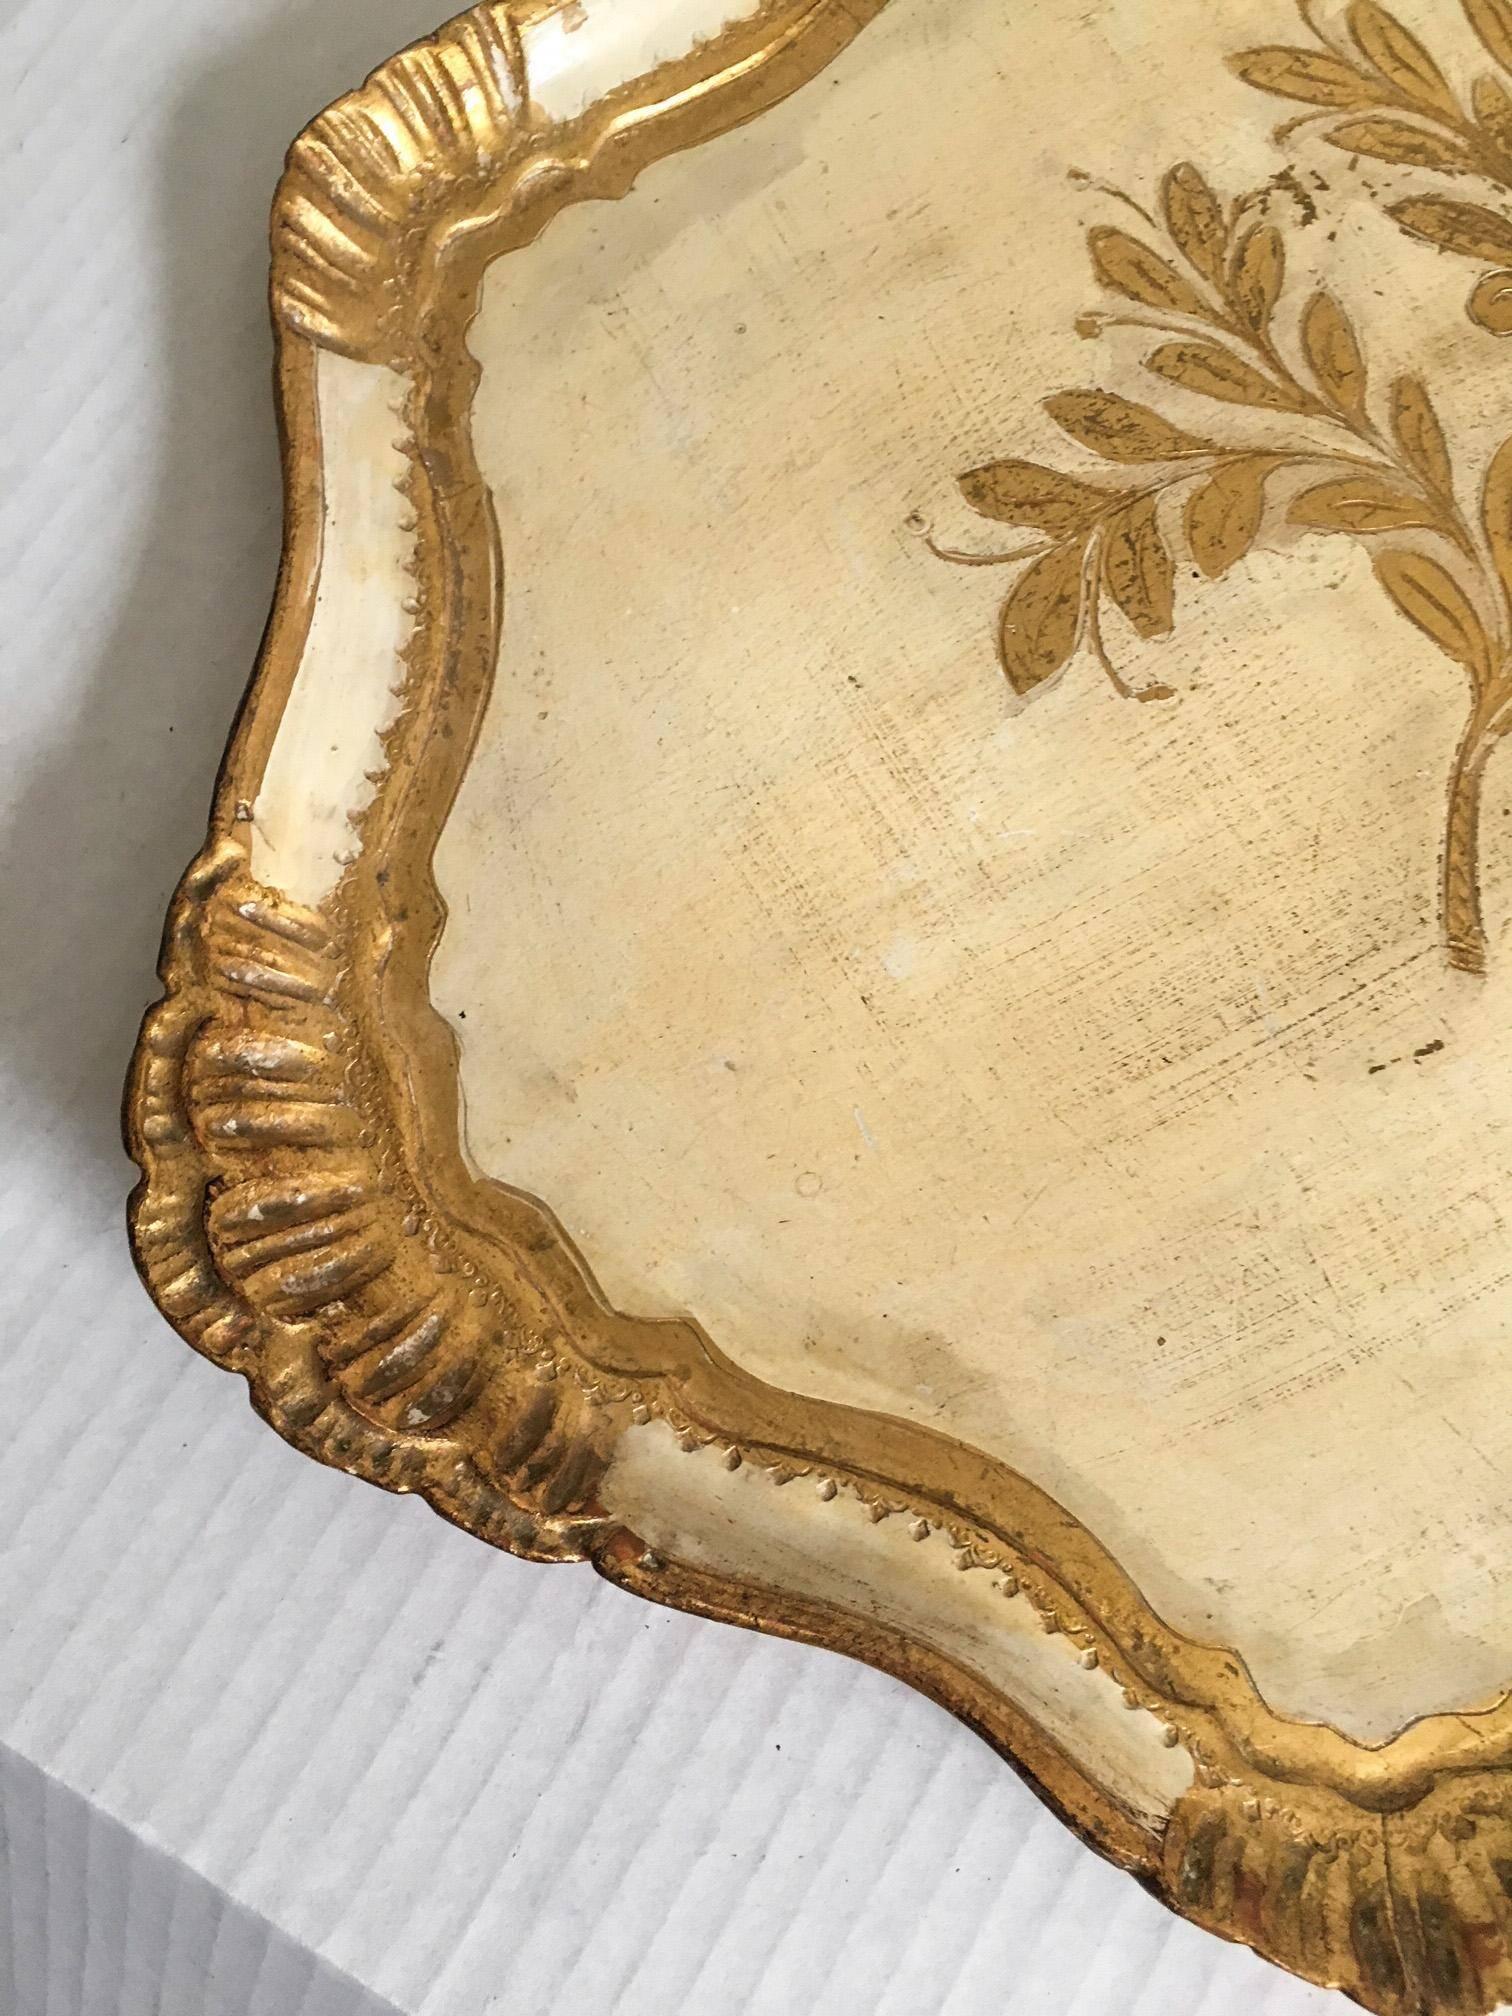 Wonderful Italian Florentine tray made of popular wood and gold leafed and painted. Surface area has some wear and glass rings as pointed out in the photographs. Marked 